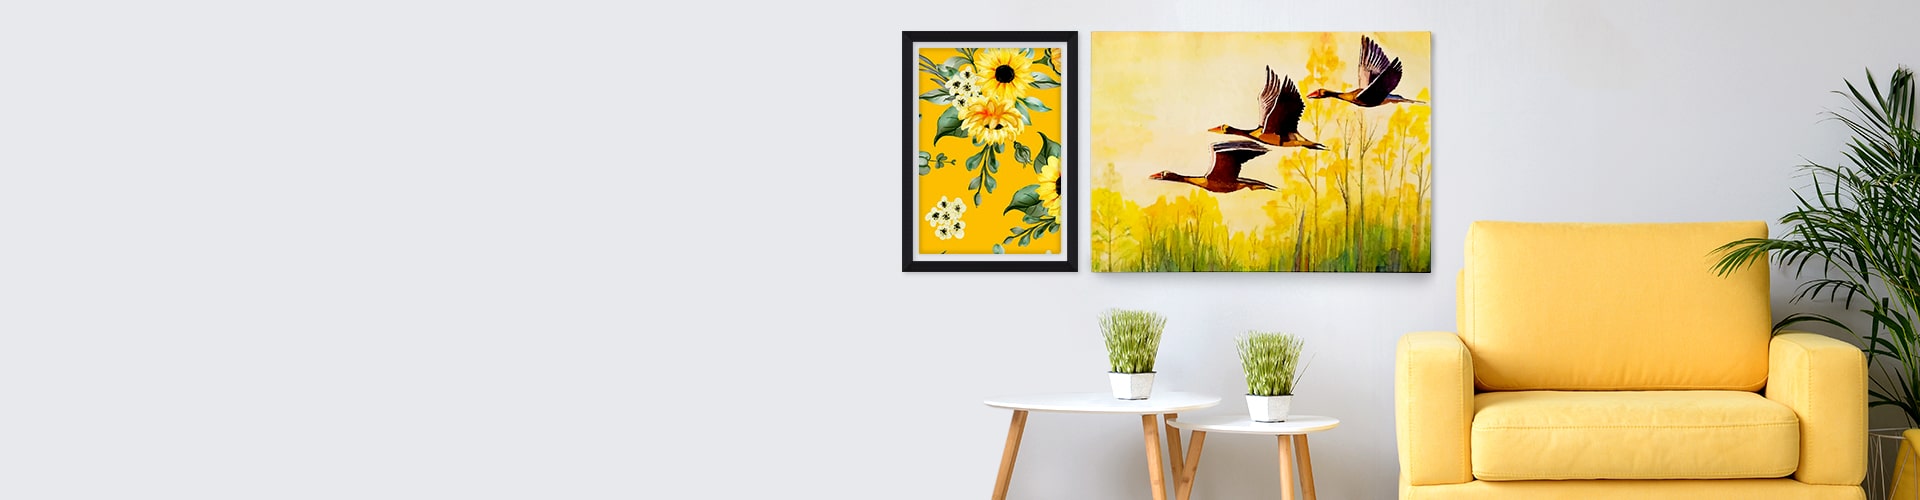 Print Your Canvas Art for Interior Home Decoration Online | Canvas ...